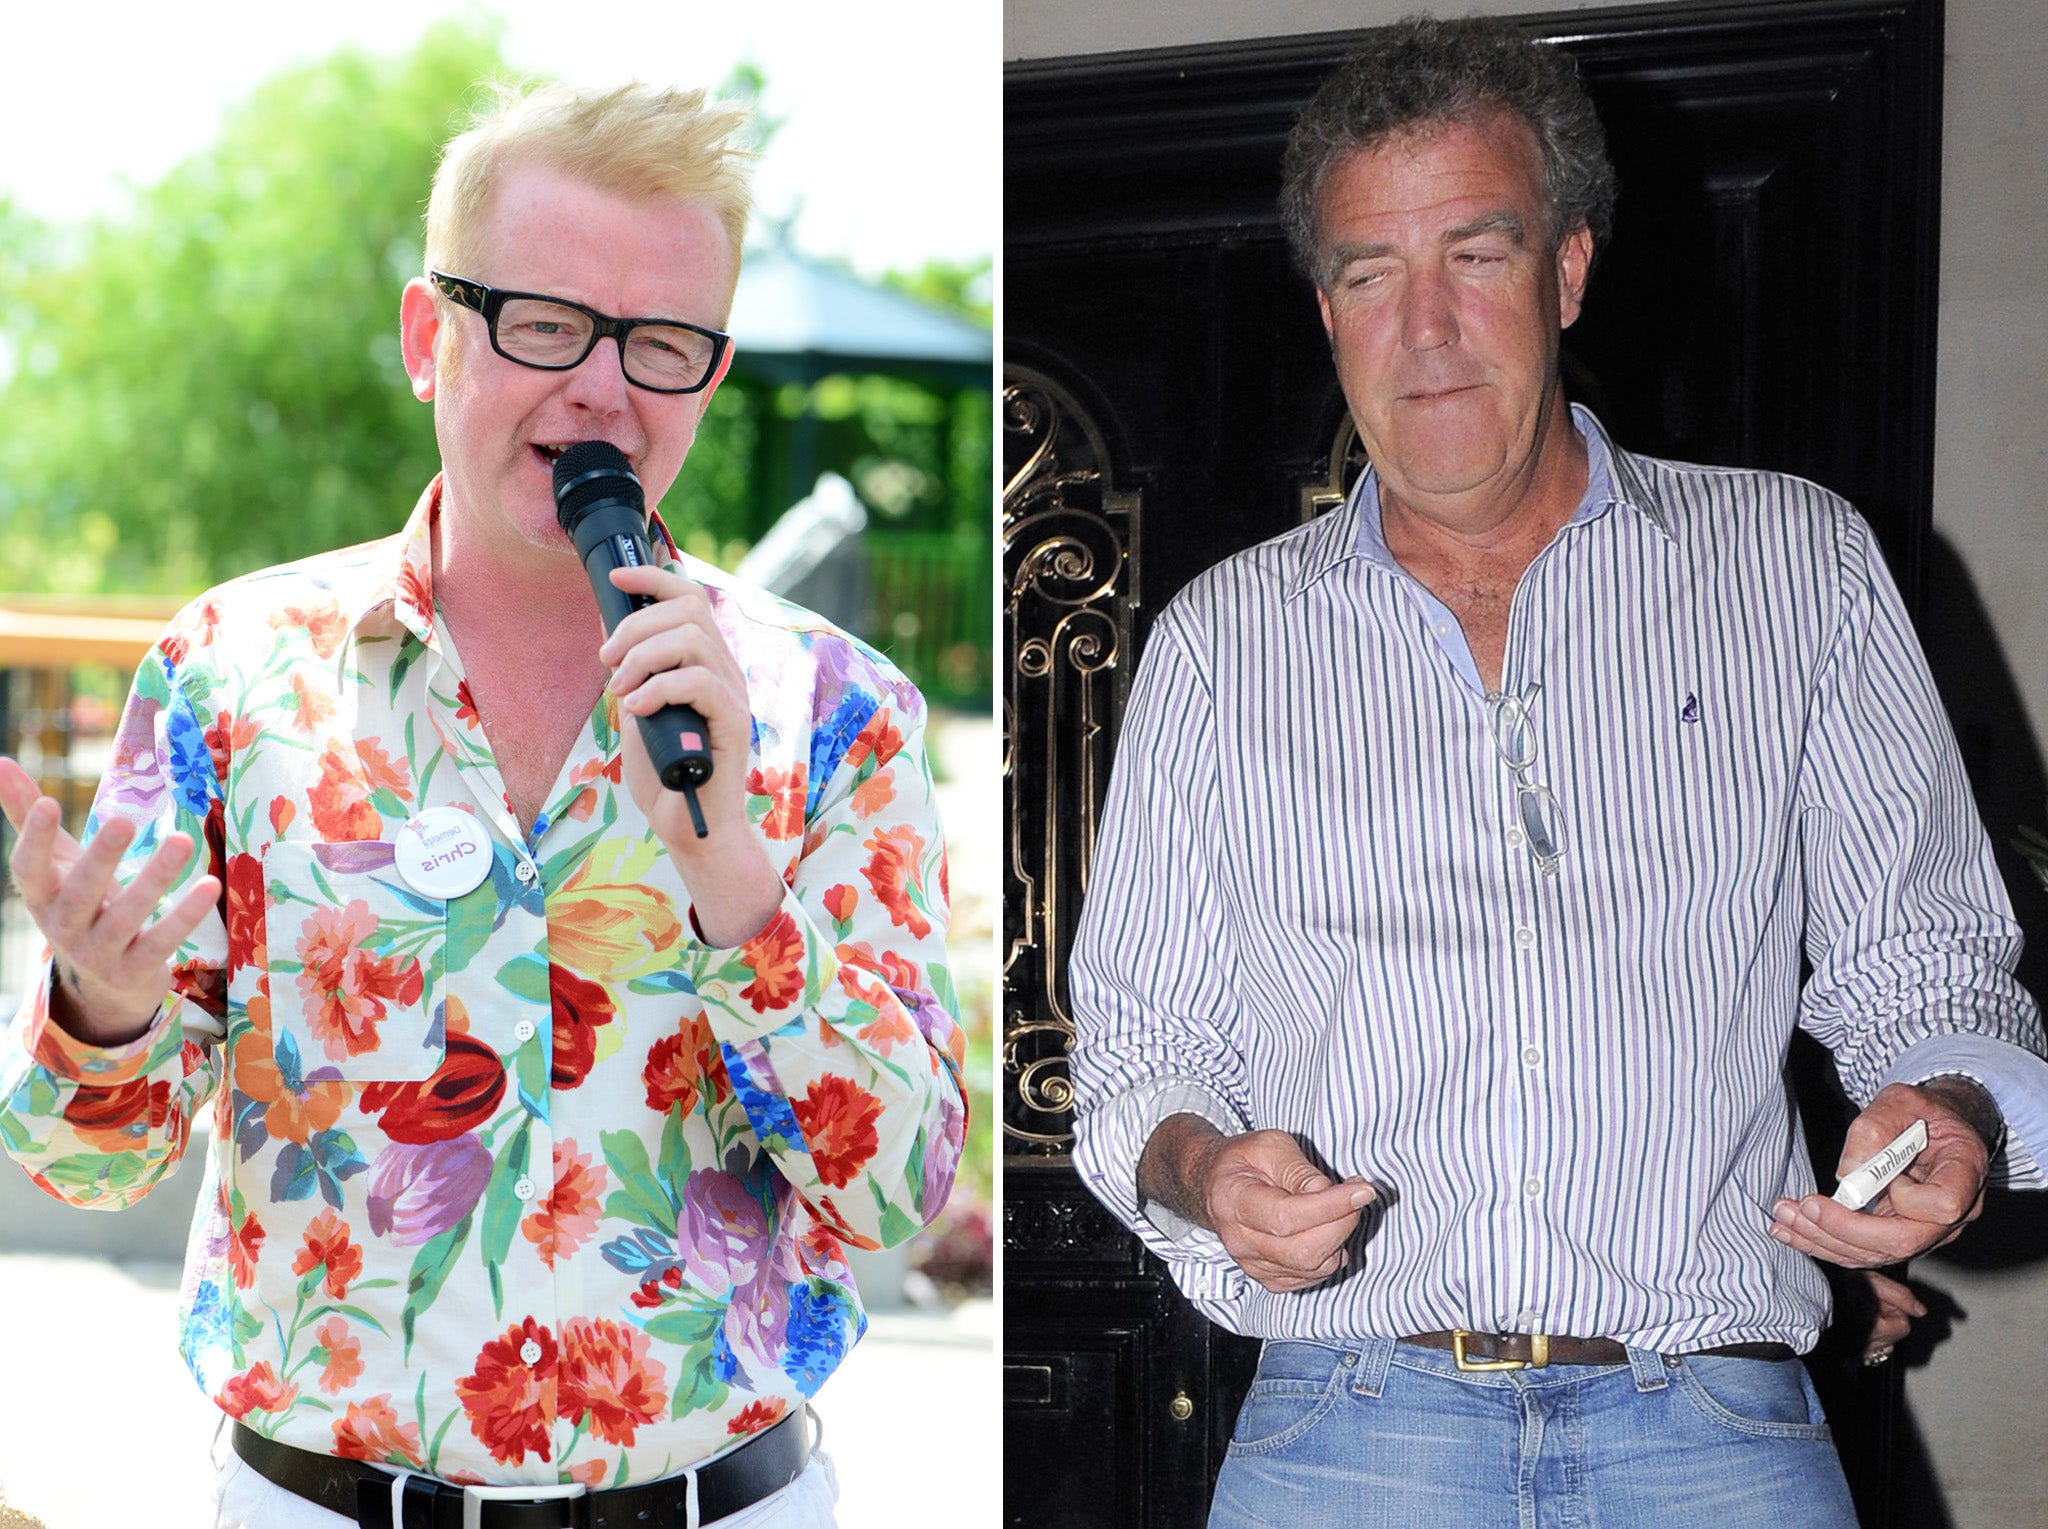 Chris Evans is the favourite to replace Jeremy Clarkson on Top Gear